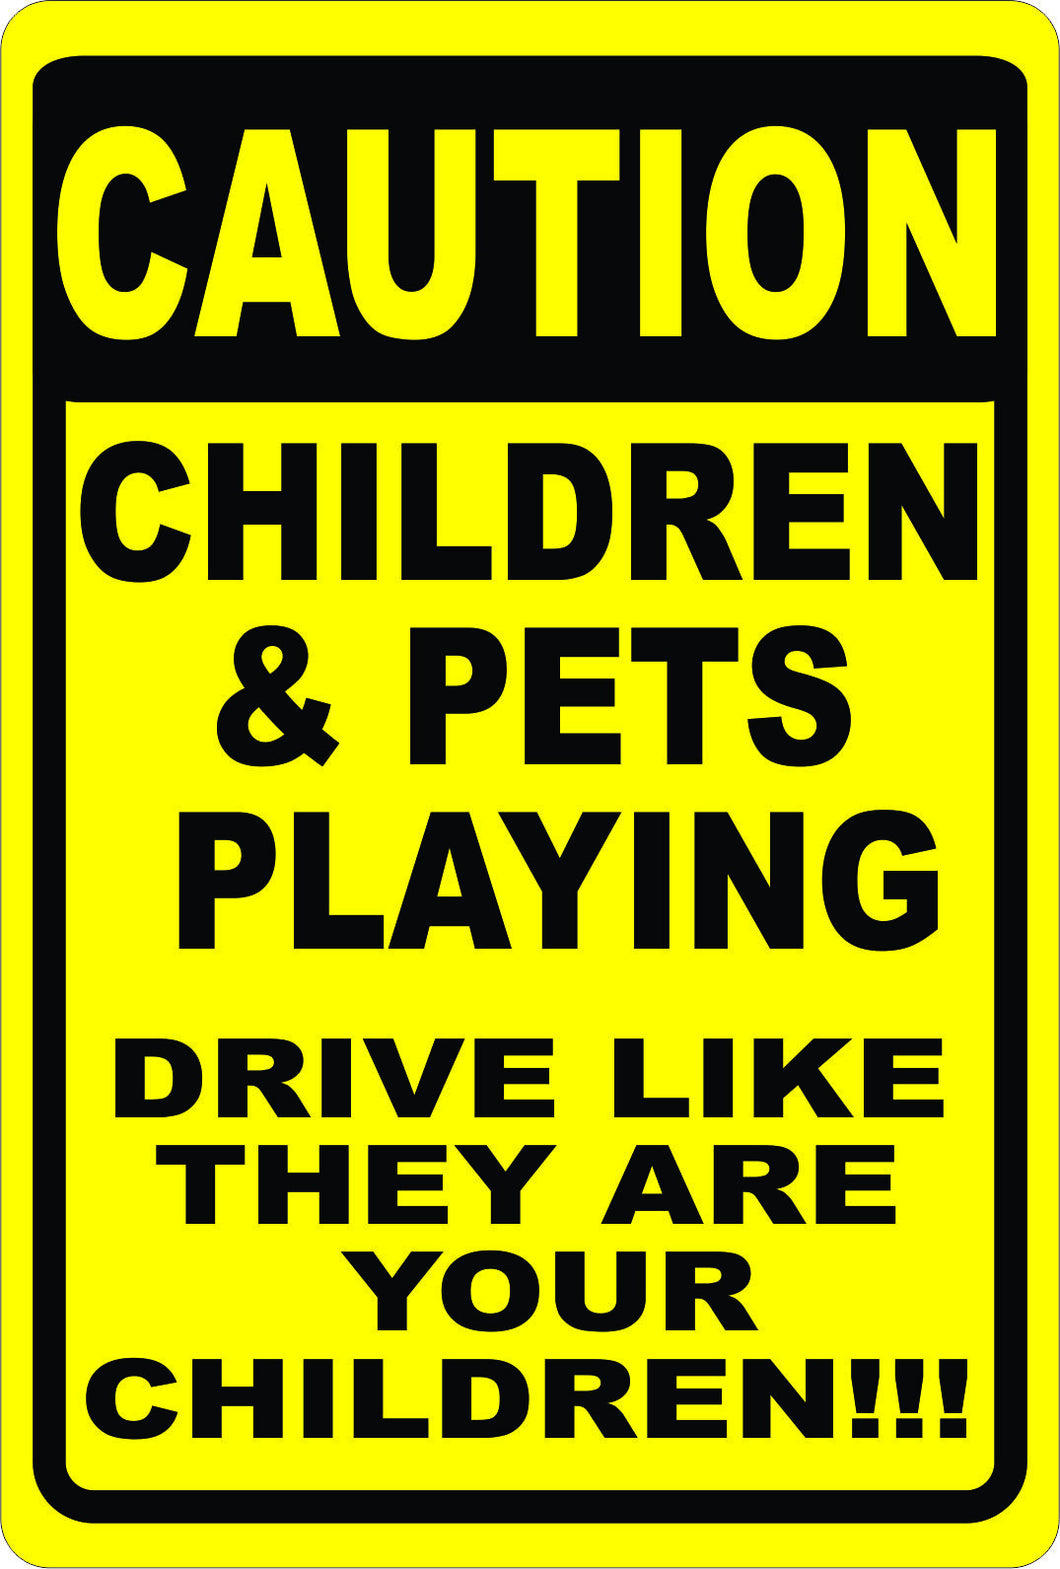 Caution Children & Pets Playing Sign. Drive Like They are Yours. - Signs & Decals by SalaGraphics